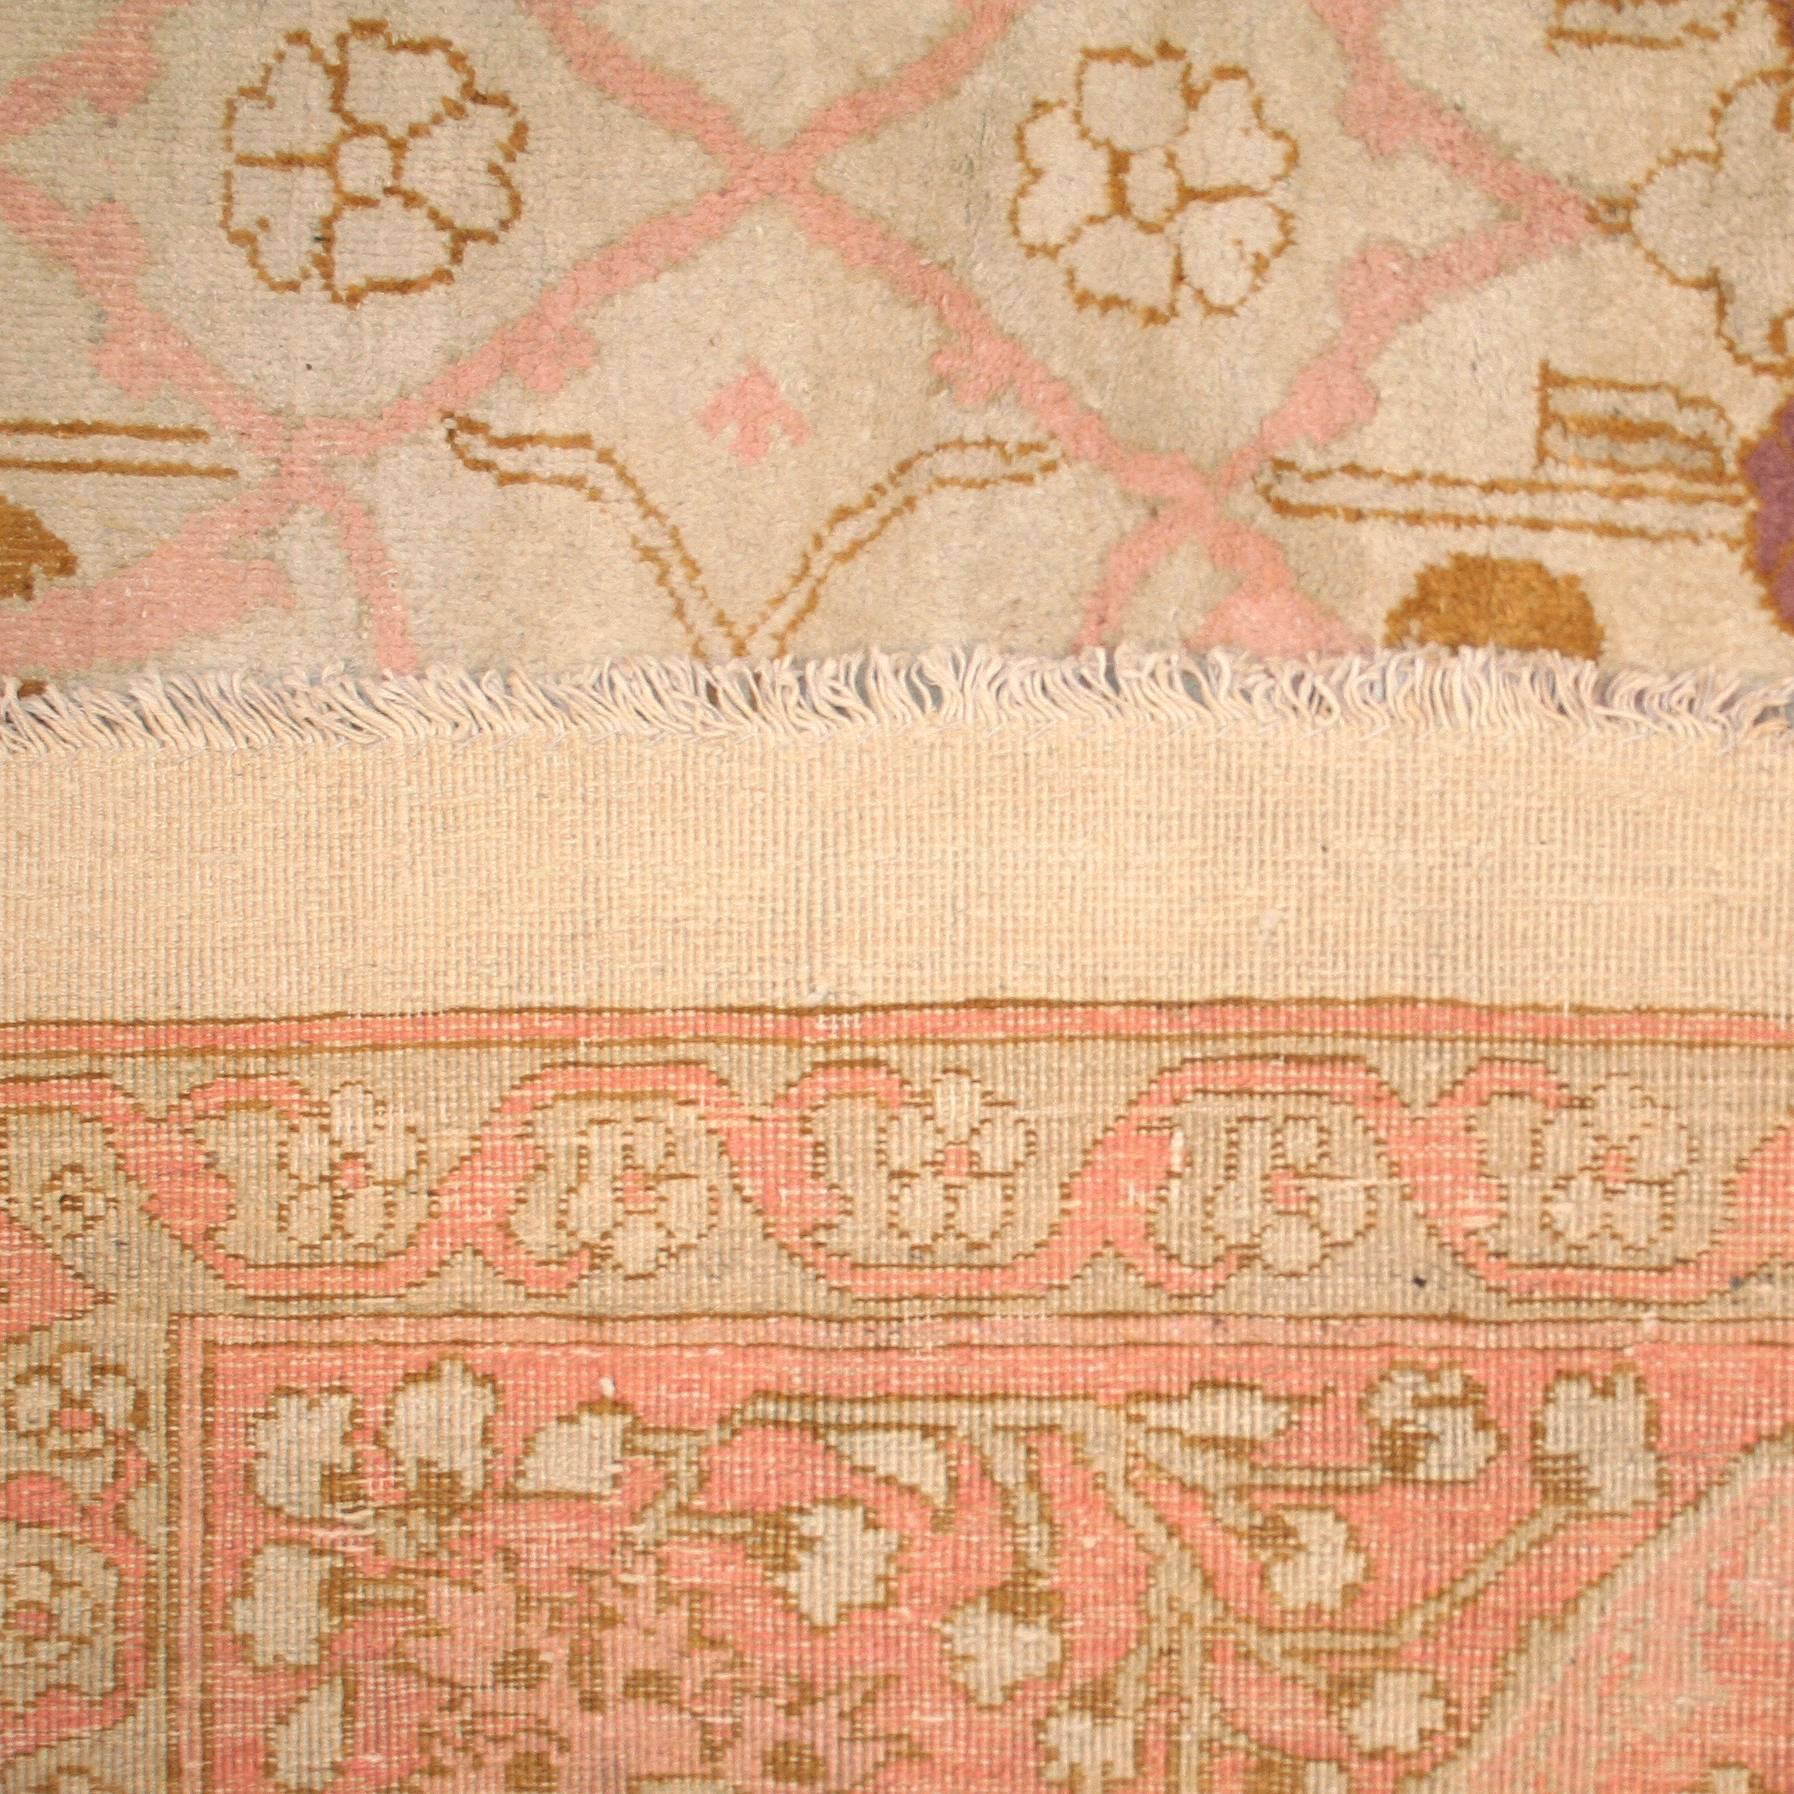 Amritsar had the reputation of being a very prestigious weaving center during the Mughal Empire. Its nineteenth century production is characterised by pastel shades, large-scale patterns and by a soft and silky wool of the pashmina type. Together